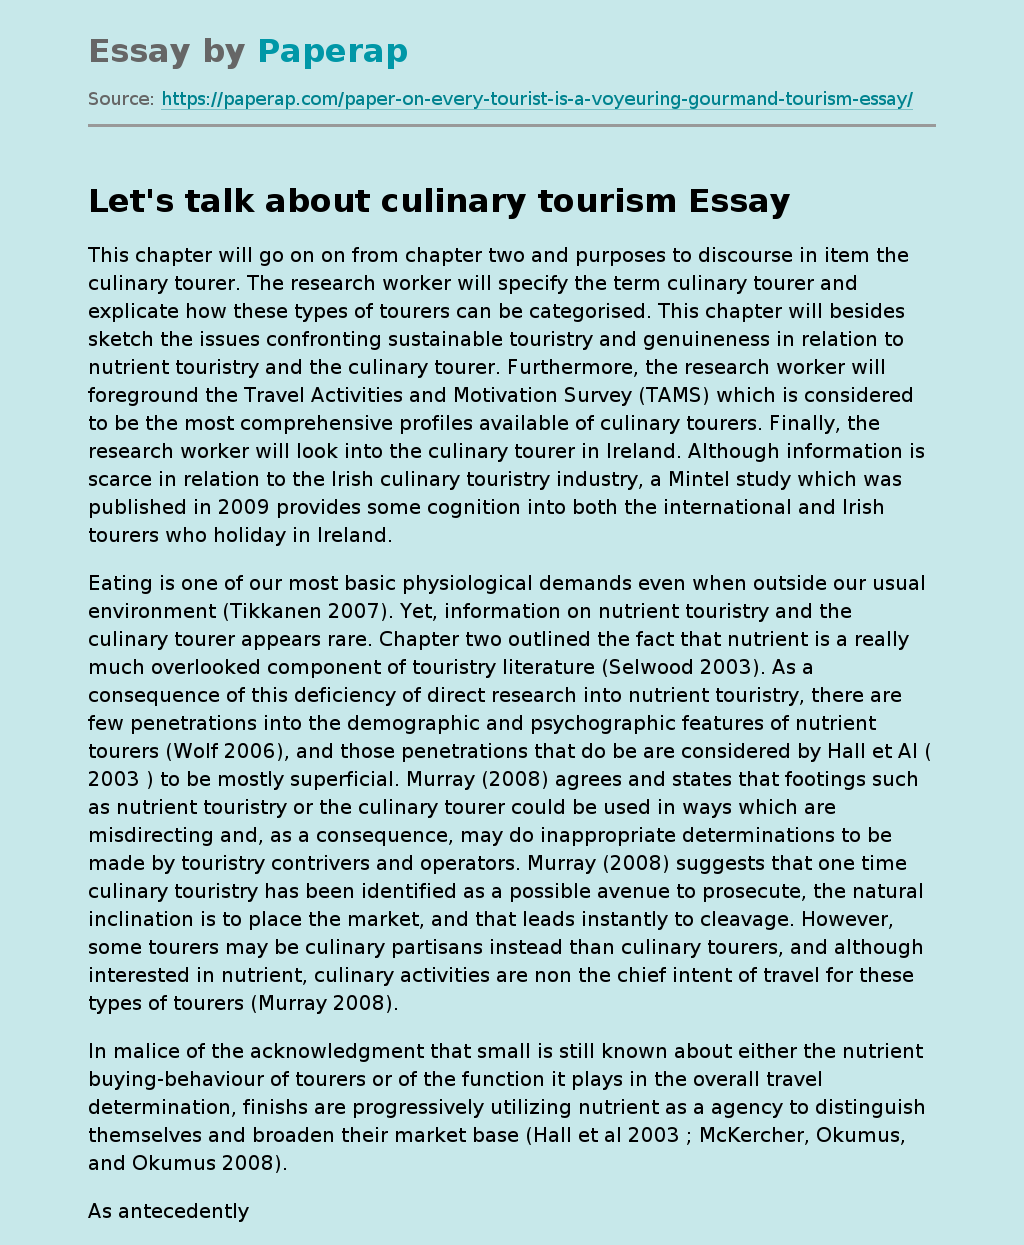 Let's talk about culinary tourism